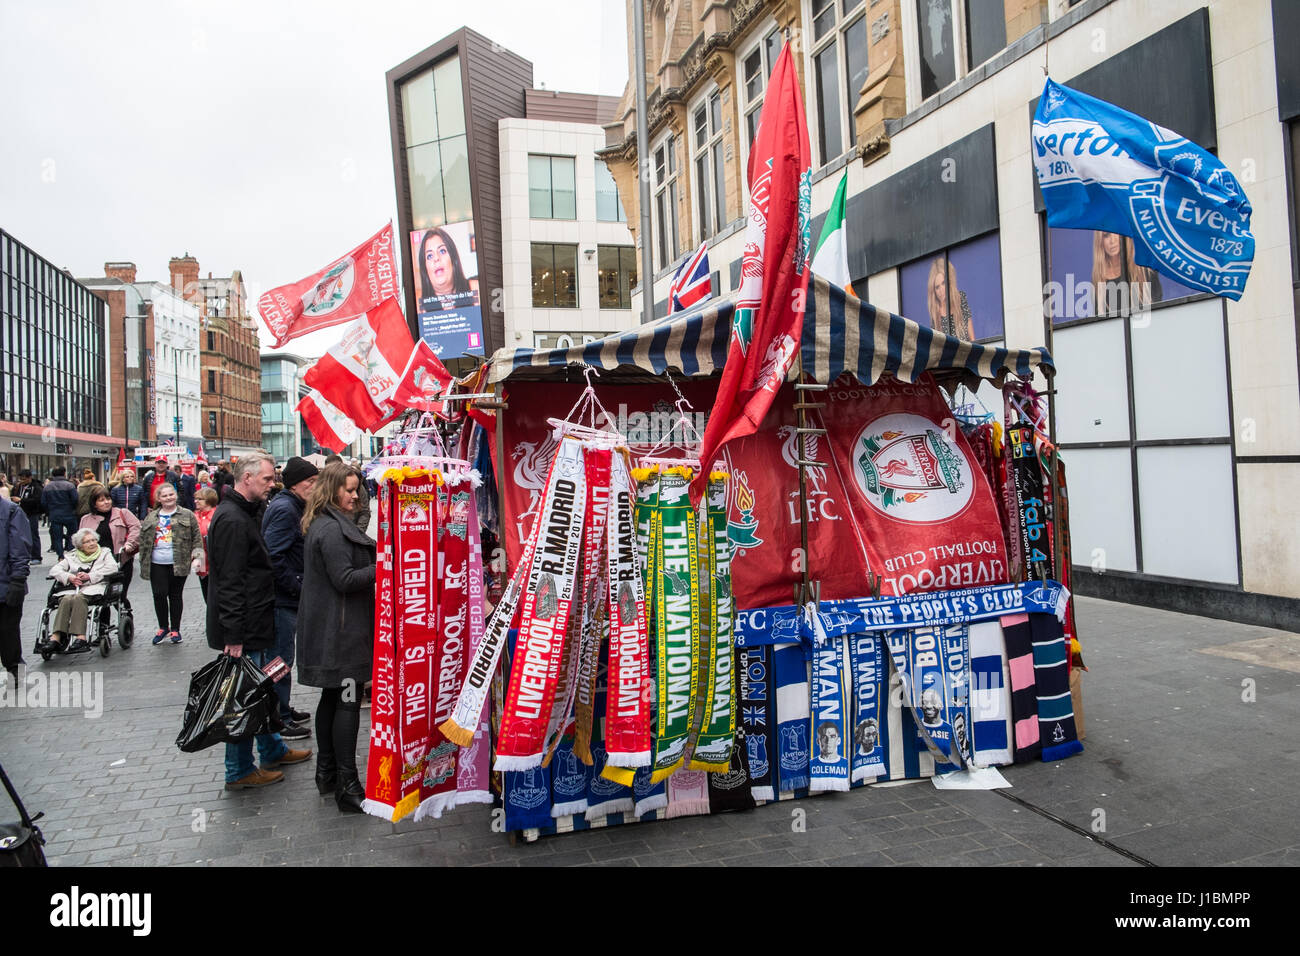 Everton, Liverpool Football club,,,CEF,foulard,echarpes,wc séparés,magasin,ville,Center,LFC Anfield, Liverpool, Merseyside, Angleterre,,Ville,Nord,Angleterre,English,UK,Royaume-Uni. Banque D'Images